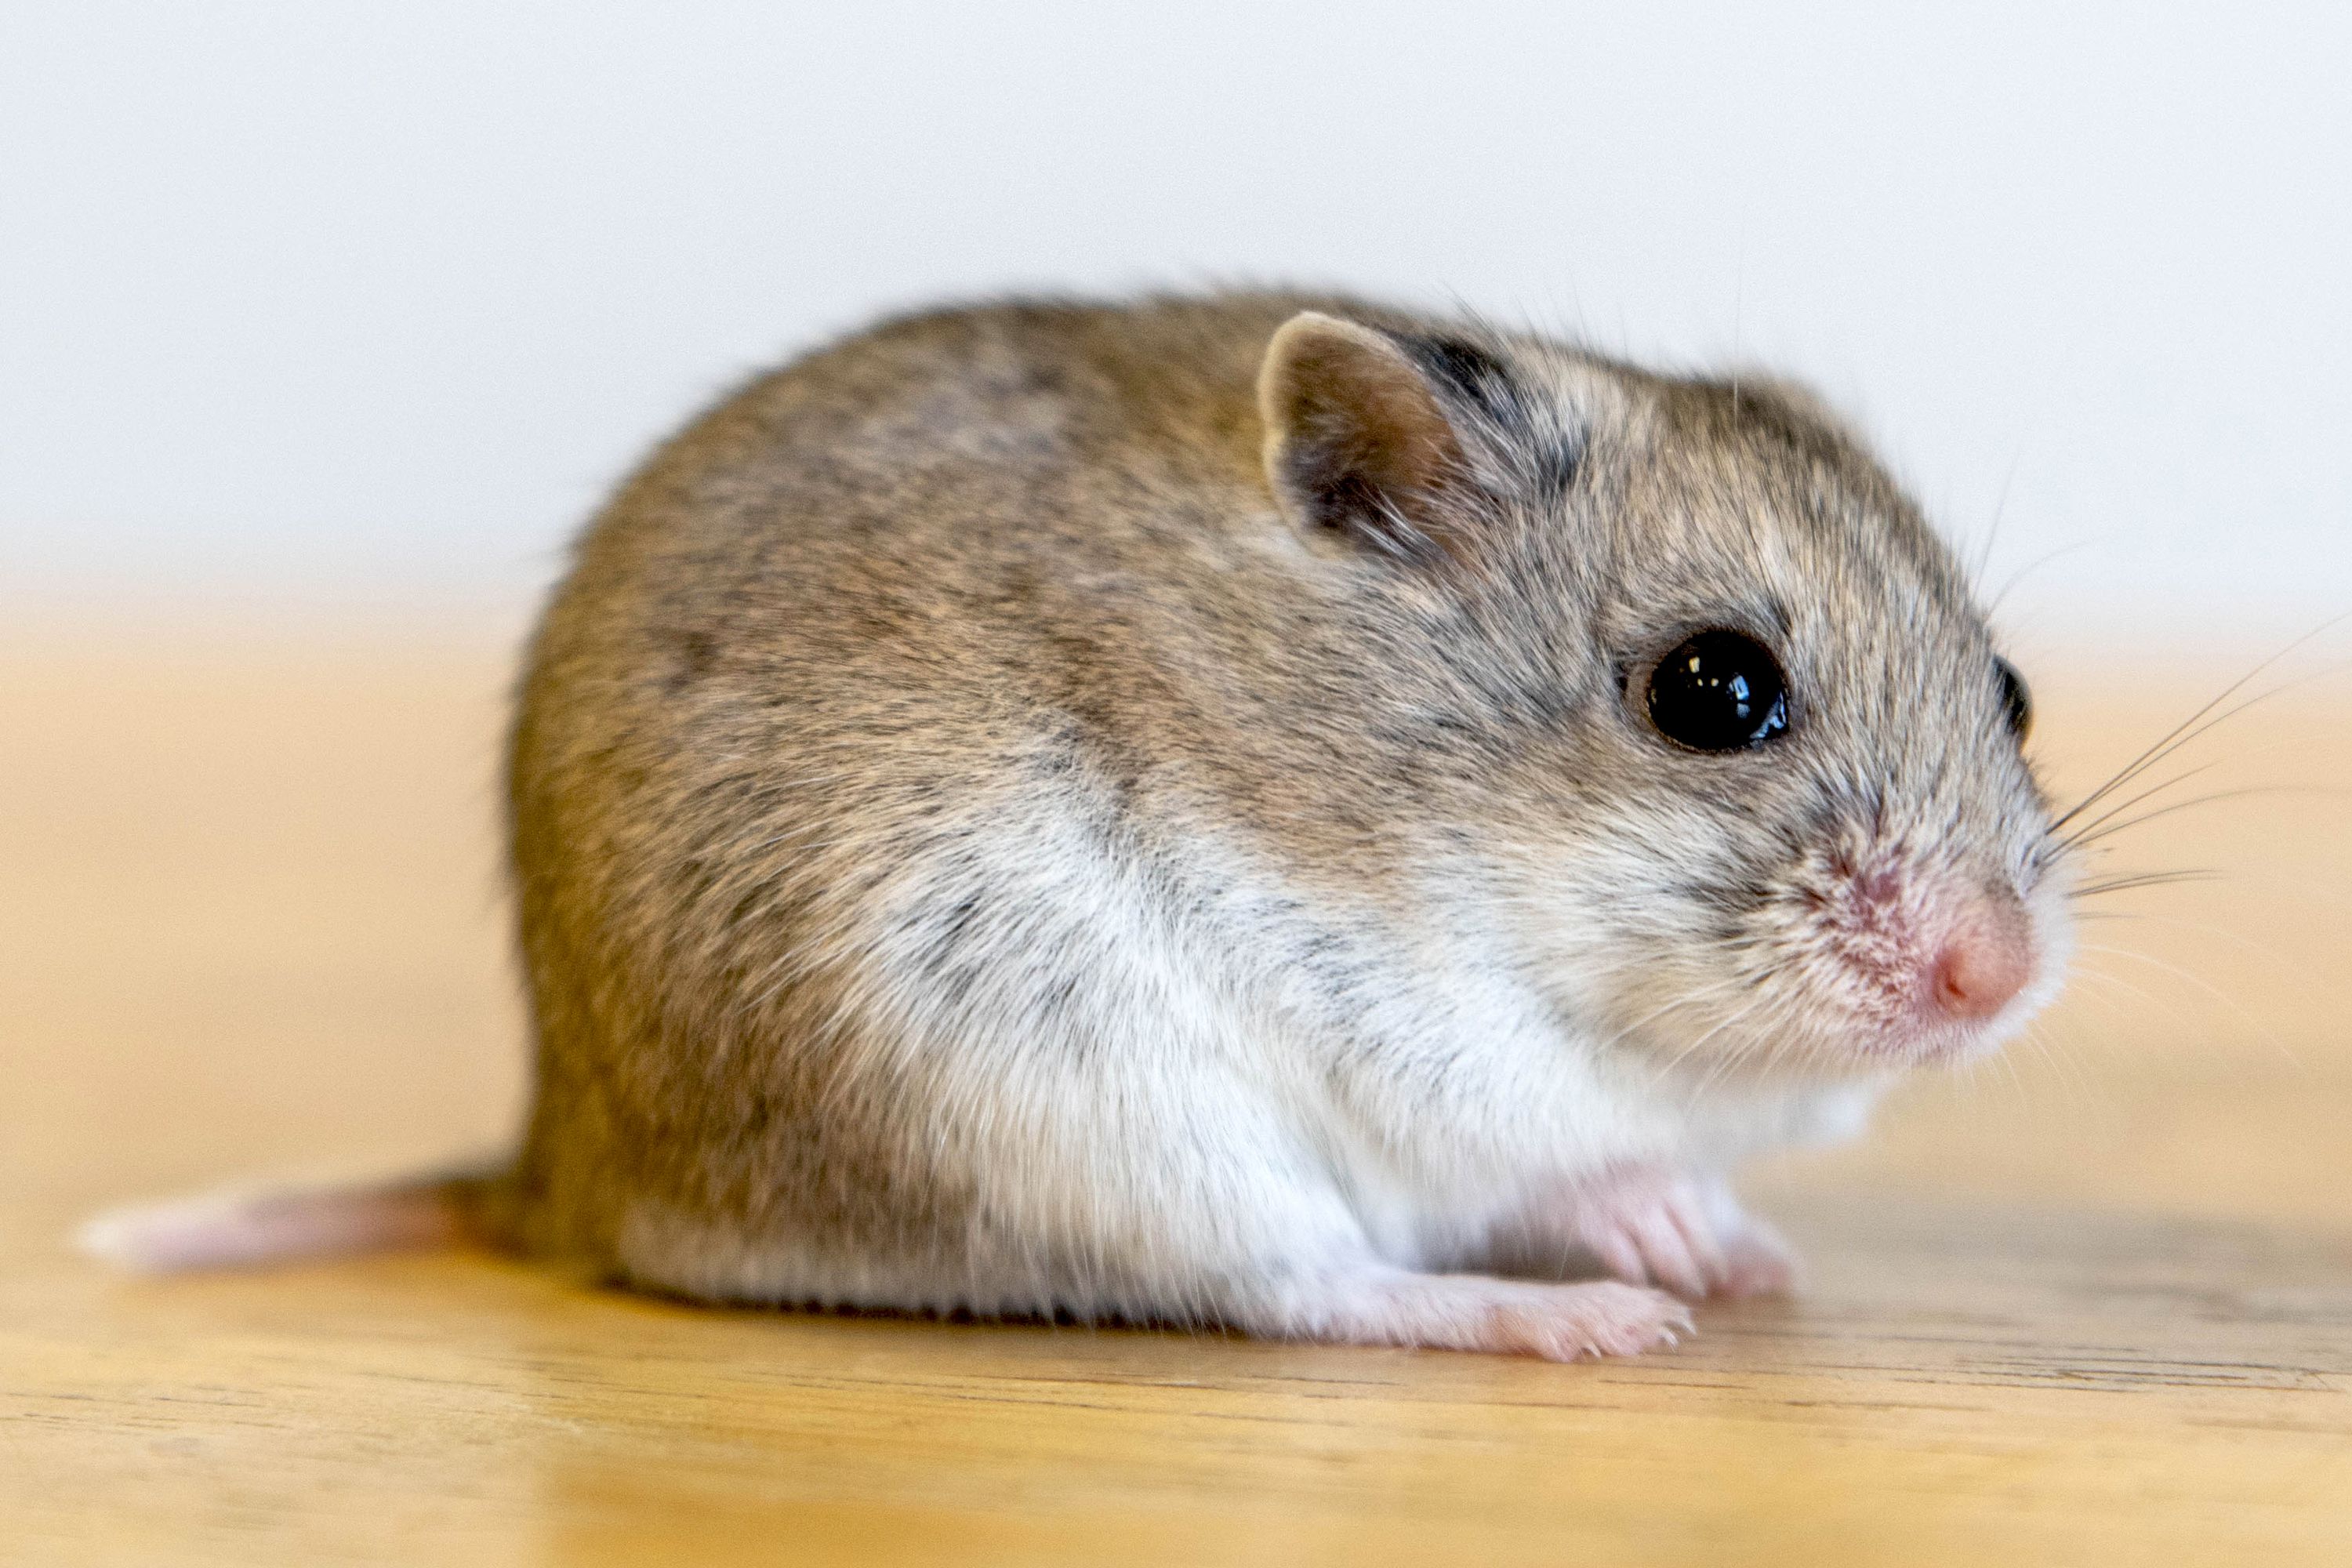 pic of a hamster